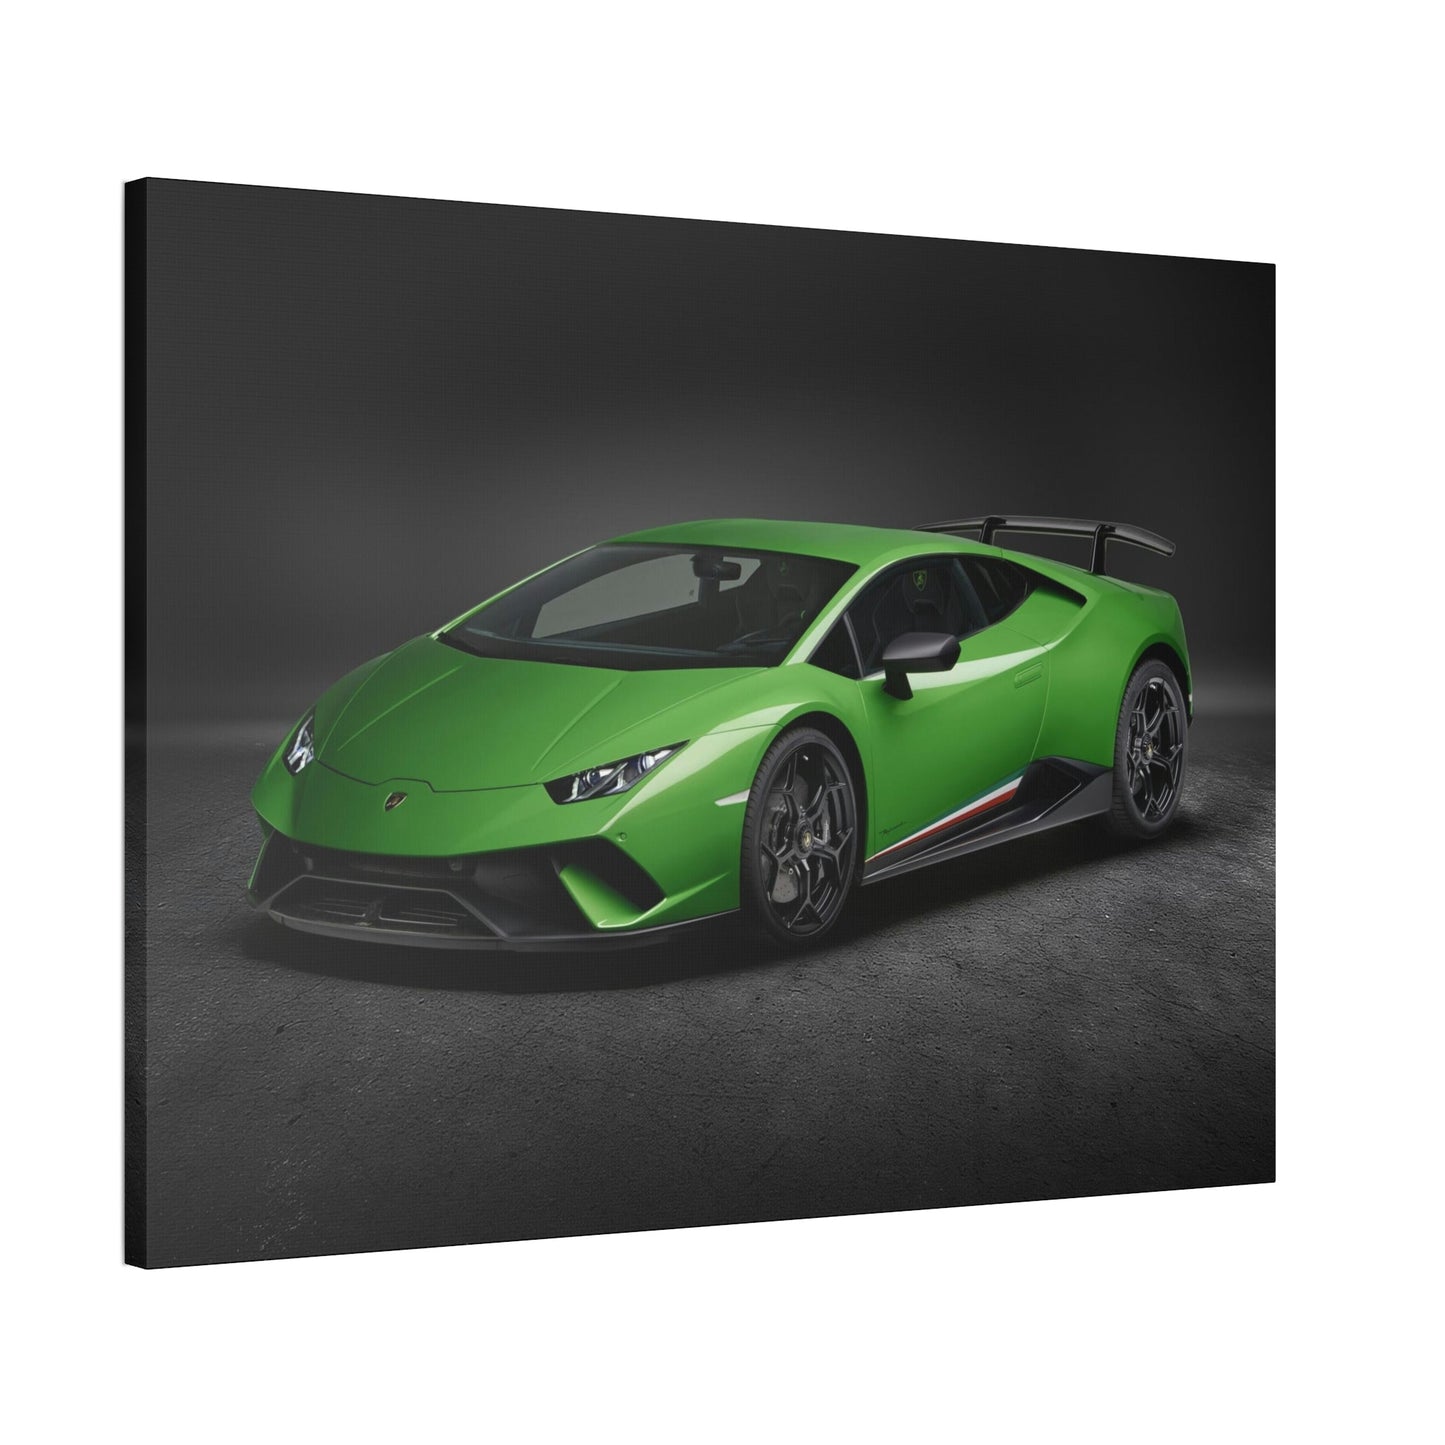 Redefining Speed: Lamborghini Canvas & Poster Print and Wall Art